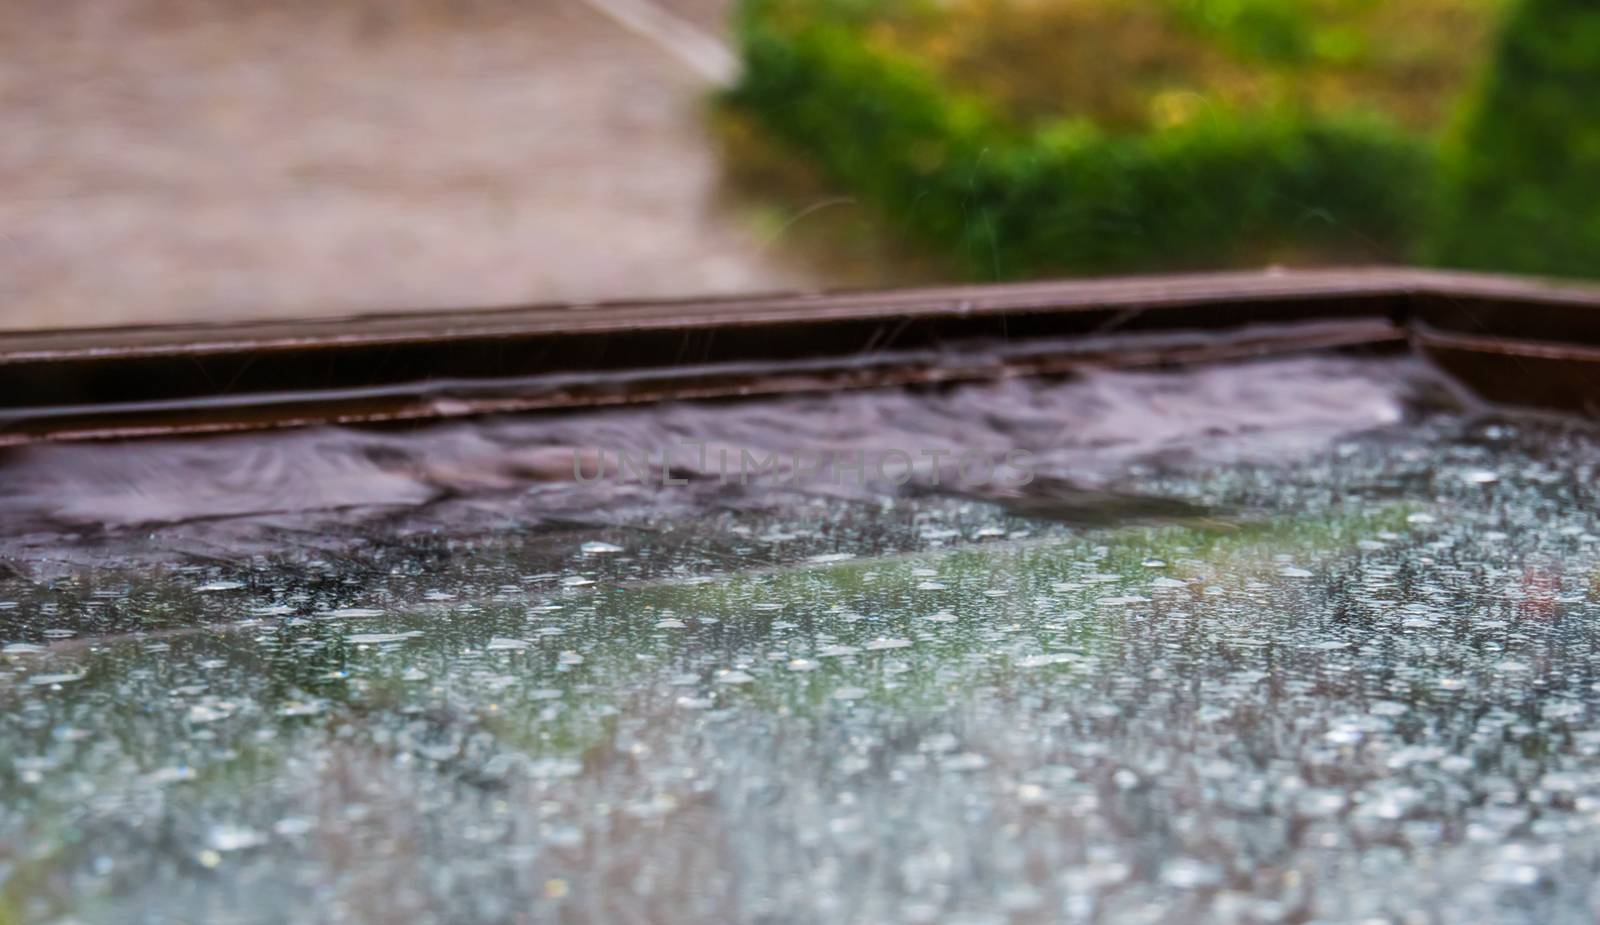 closeup of a wet window during rainy weather, the european climate